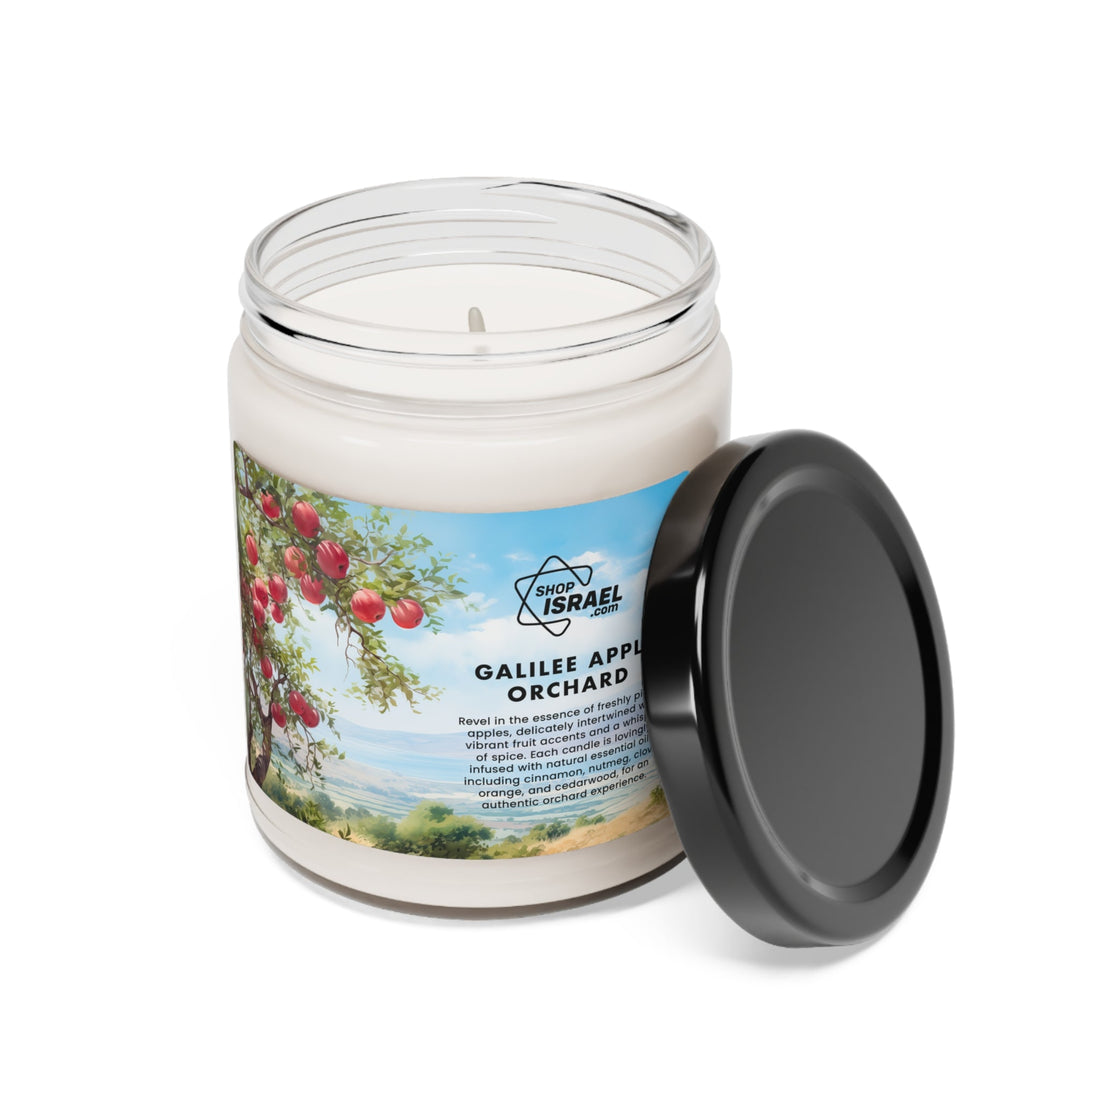 Essence of Israel Scented Candle - Shop Israel